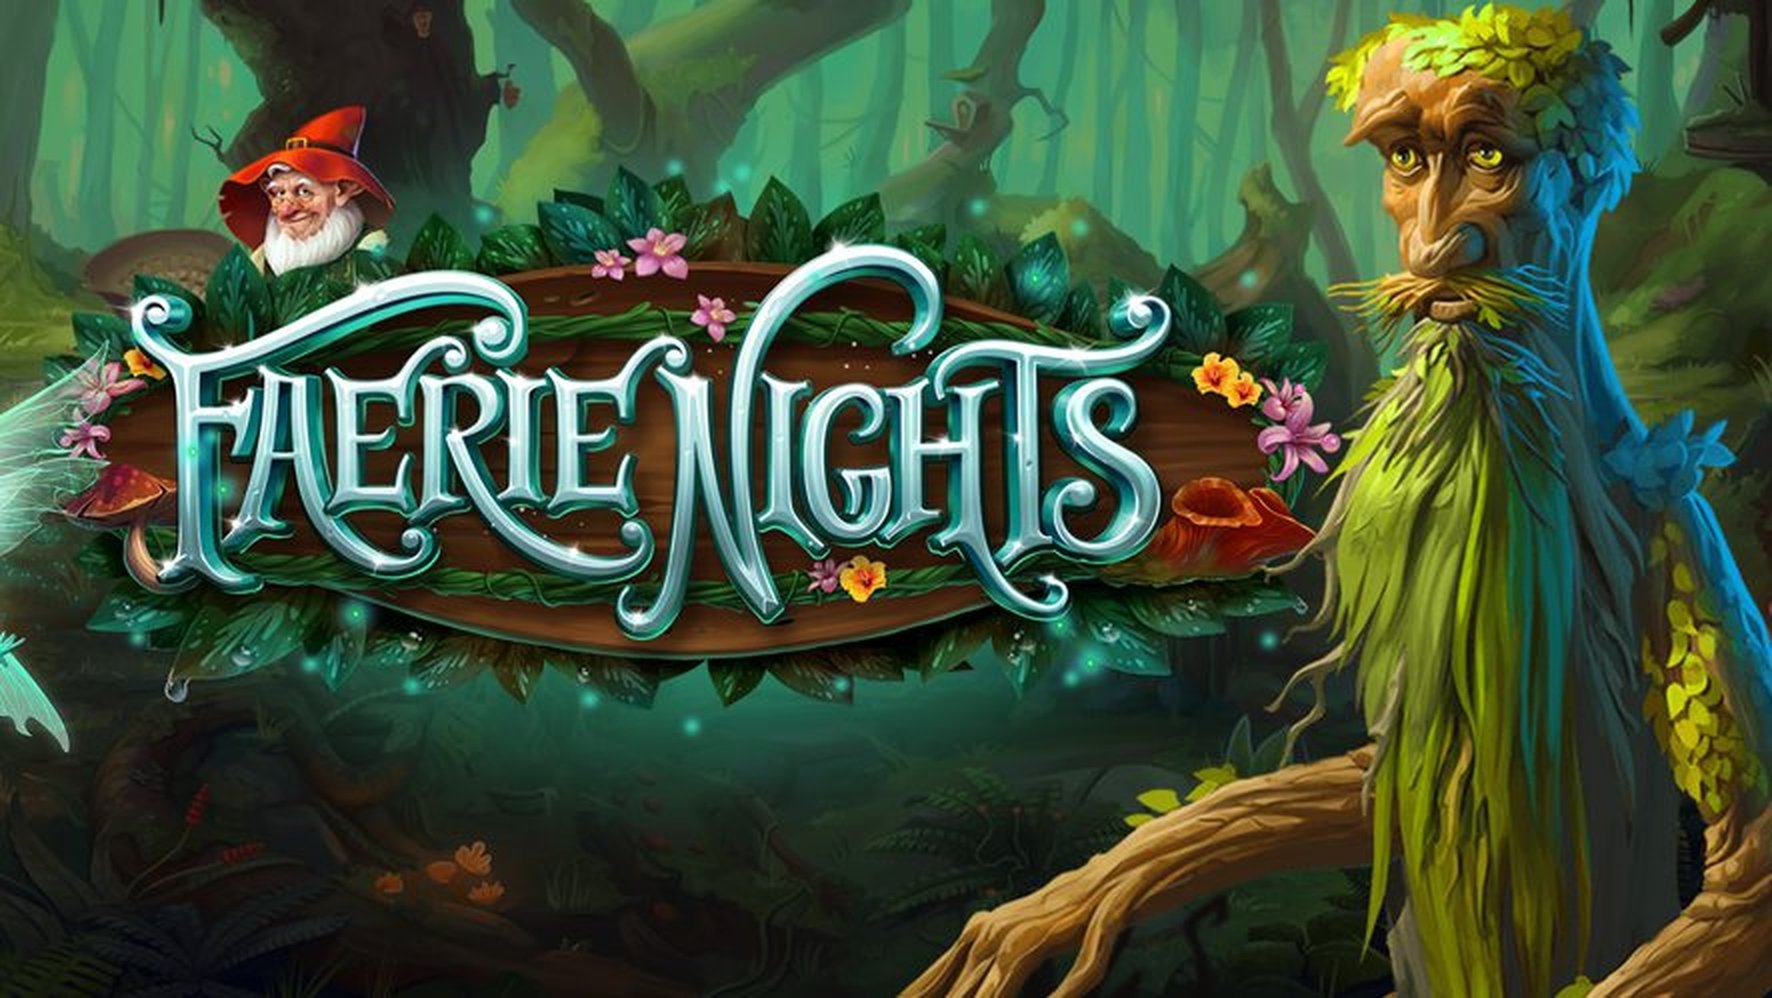 The Fairie Nights Online Slot Demo Game by 1x2 Gaming